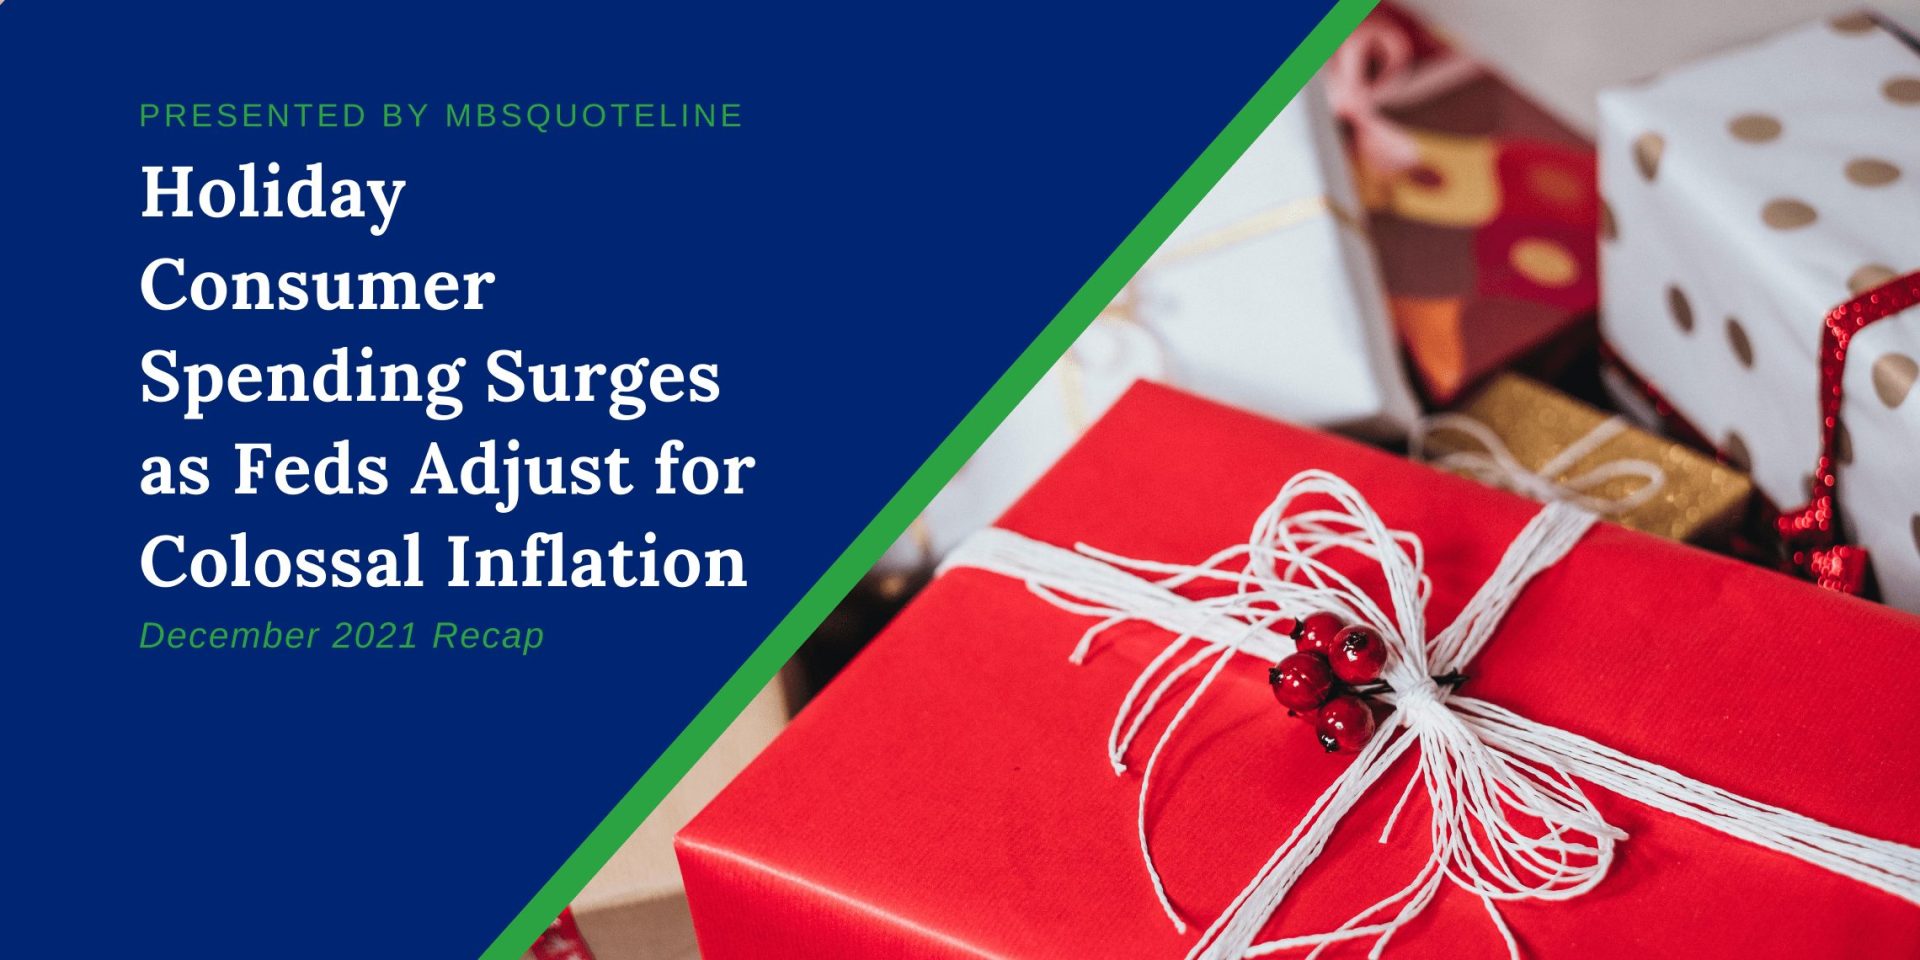 holiday consumer spending surges mortgagetime mbsquoteline